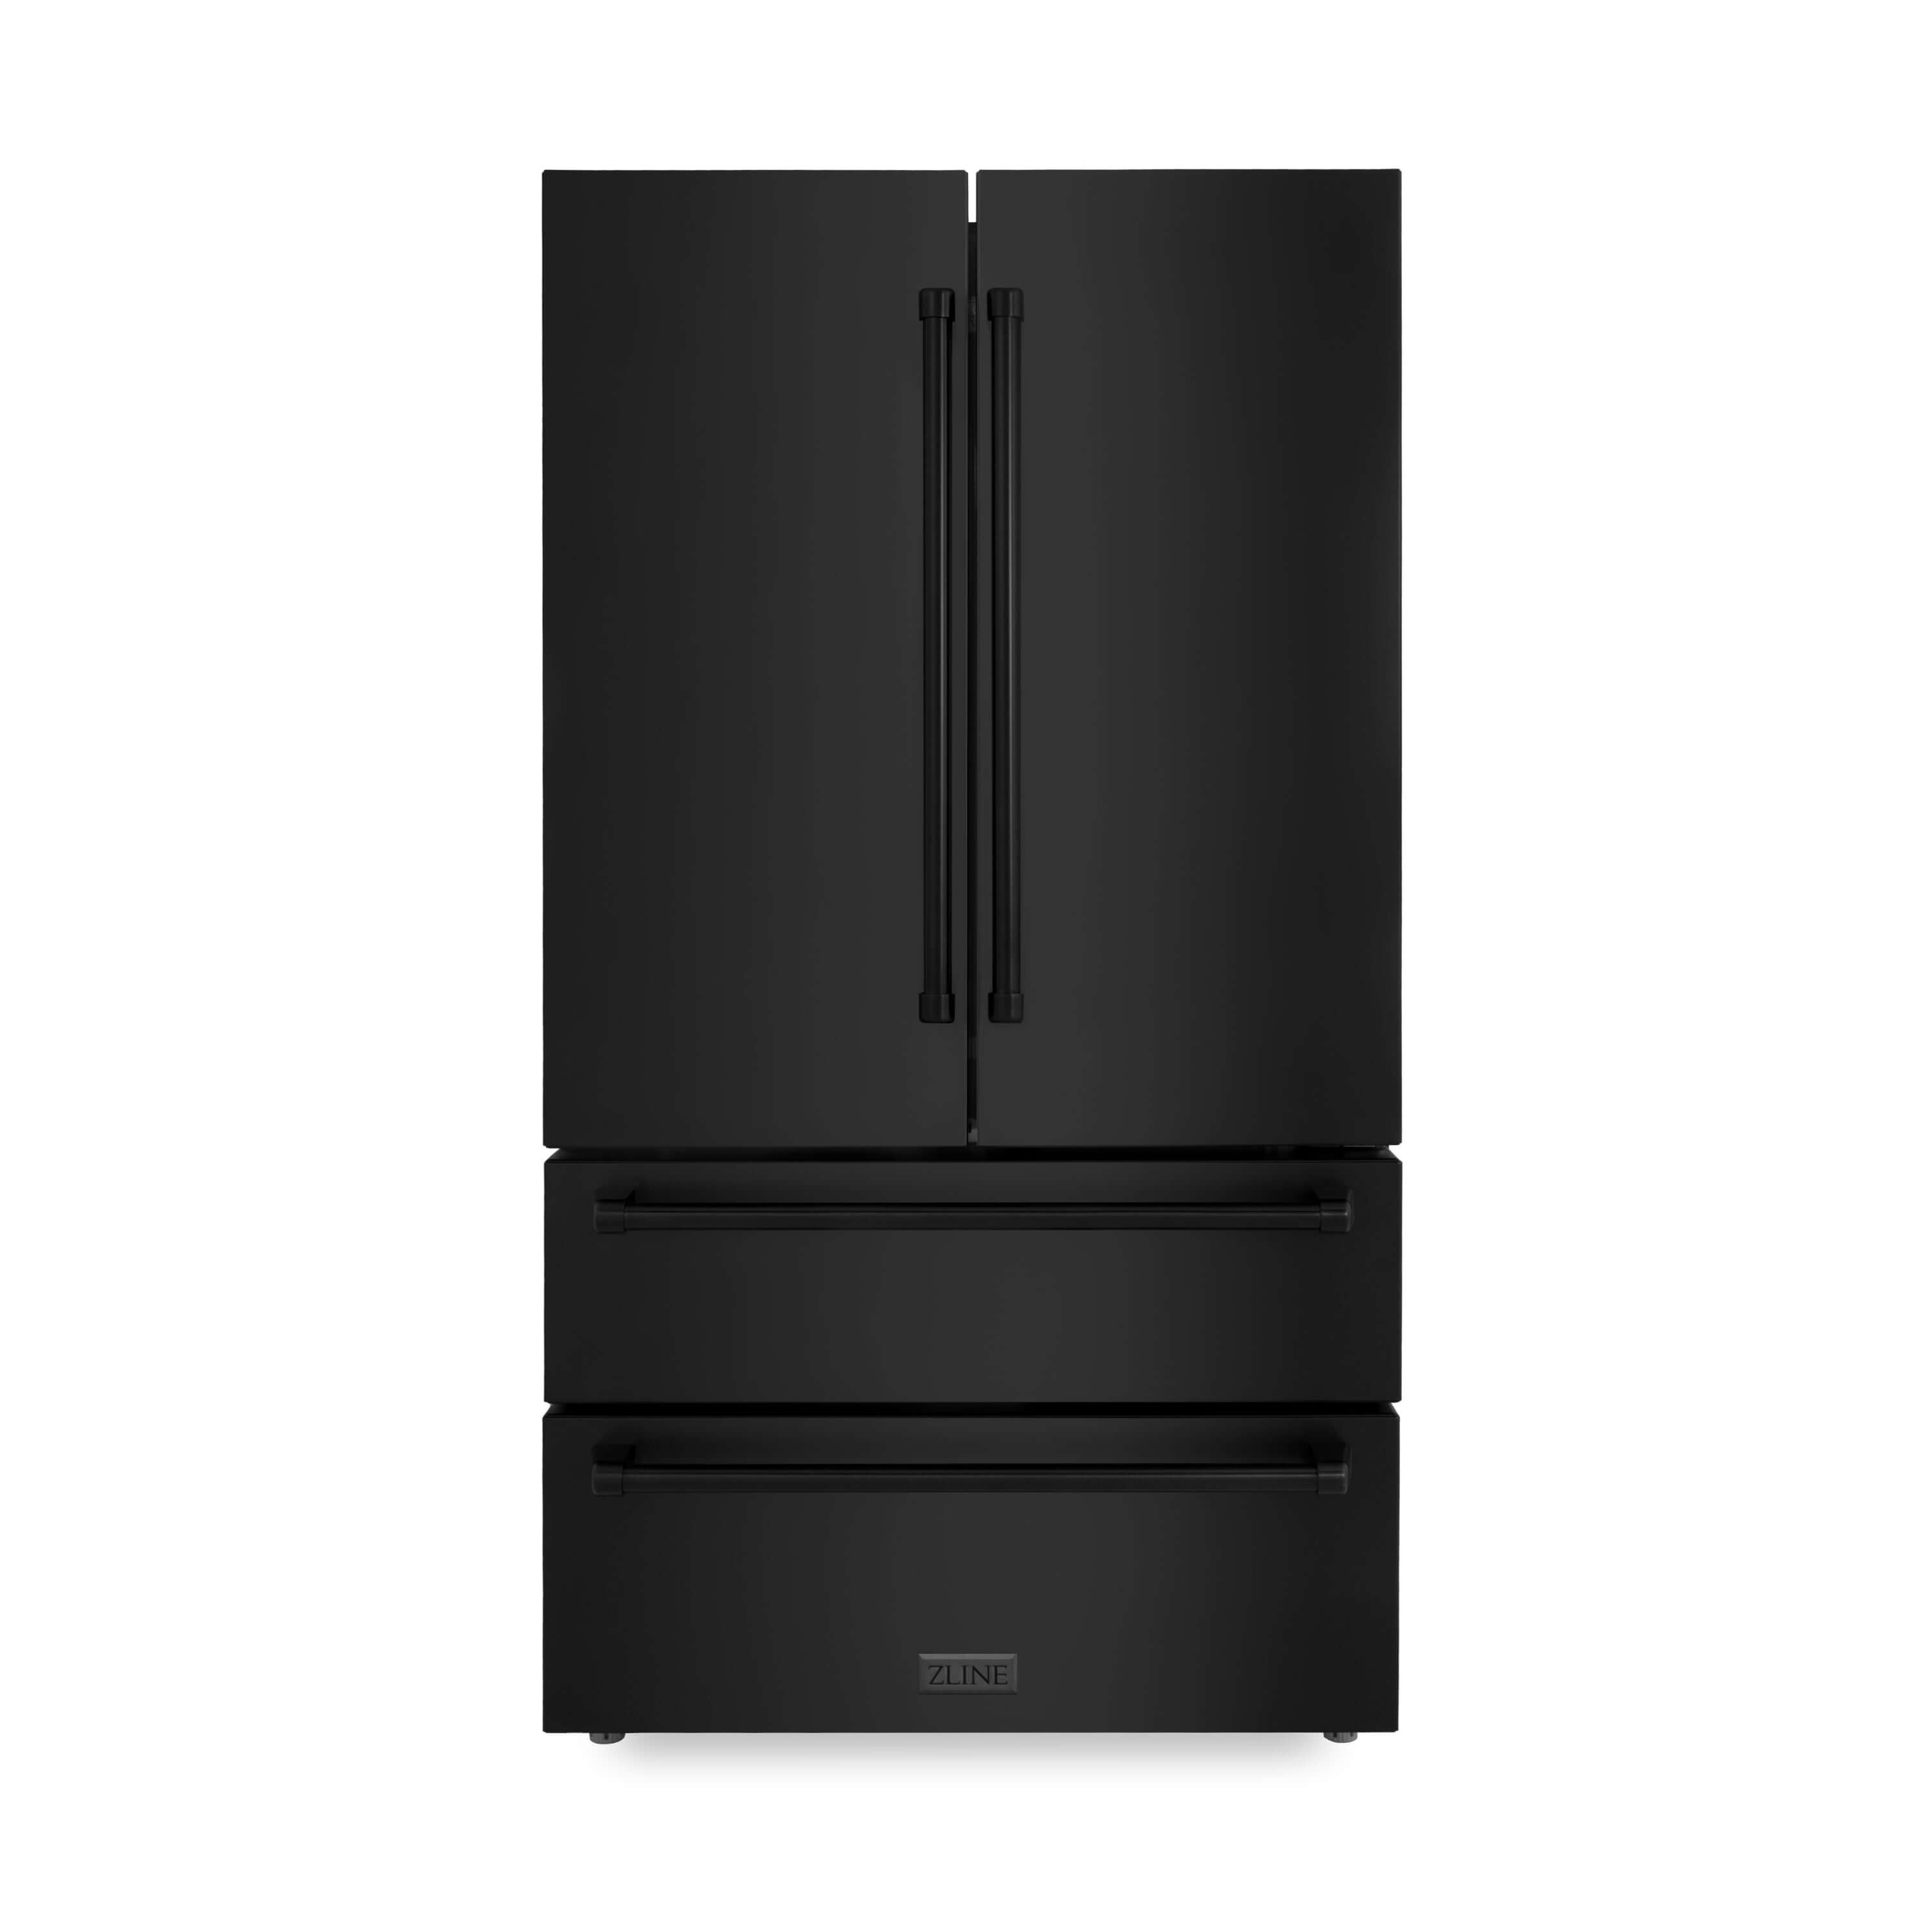 ZLINE Kitchen Package in Black Stainless Steel with 36 in. Refrigerator, 30 in. Dual Fuel Range, 30 in. Range Hood, 24 in. Microwave Drawer, and 24 in. Tall Tub Dishwasher (5KPR-RABRH-MWDWV) refrigerator front, closed.